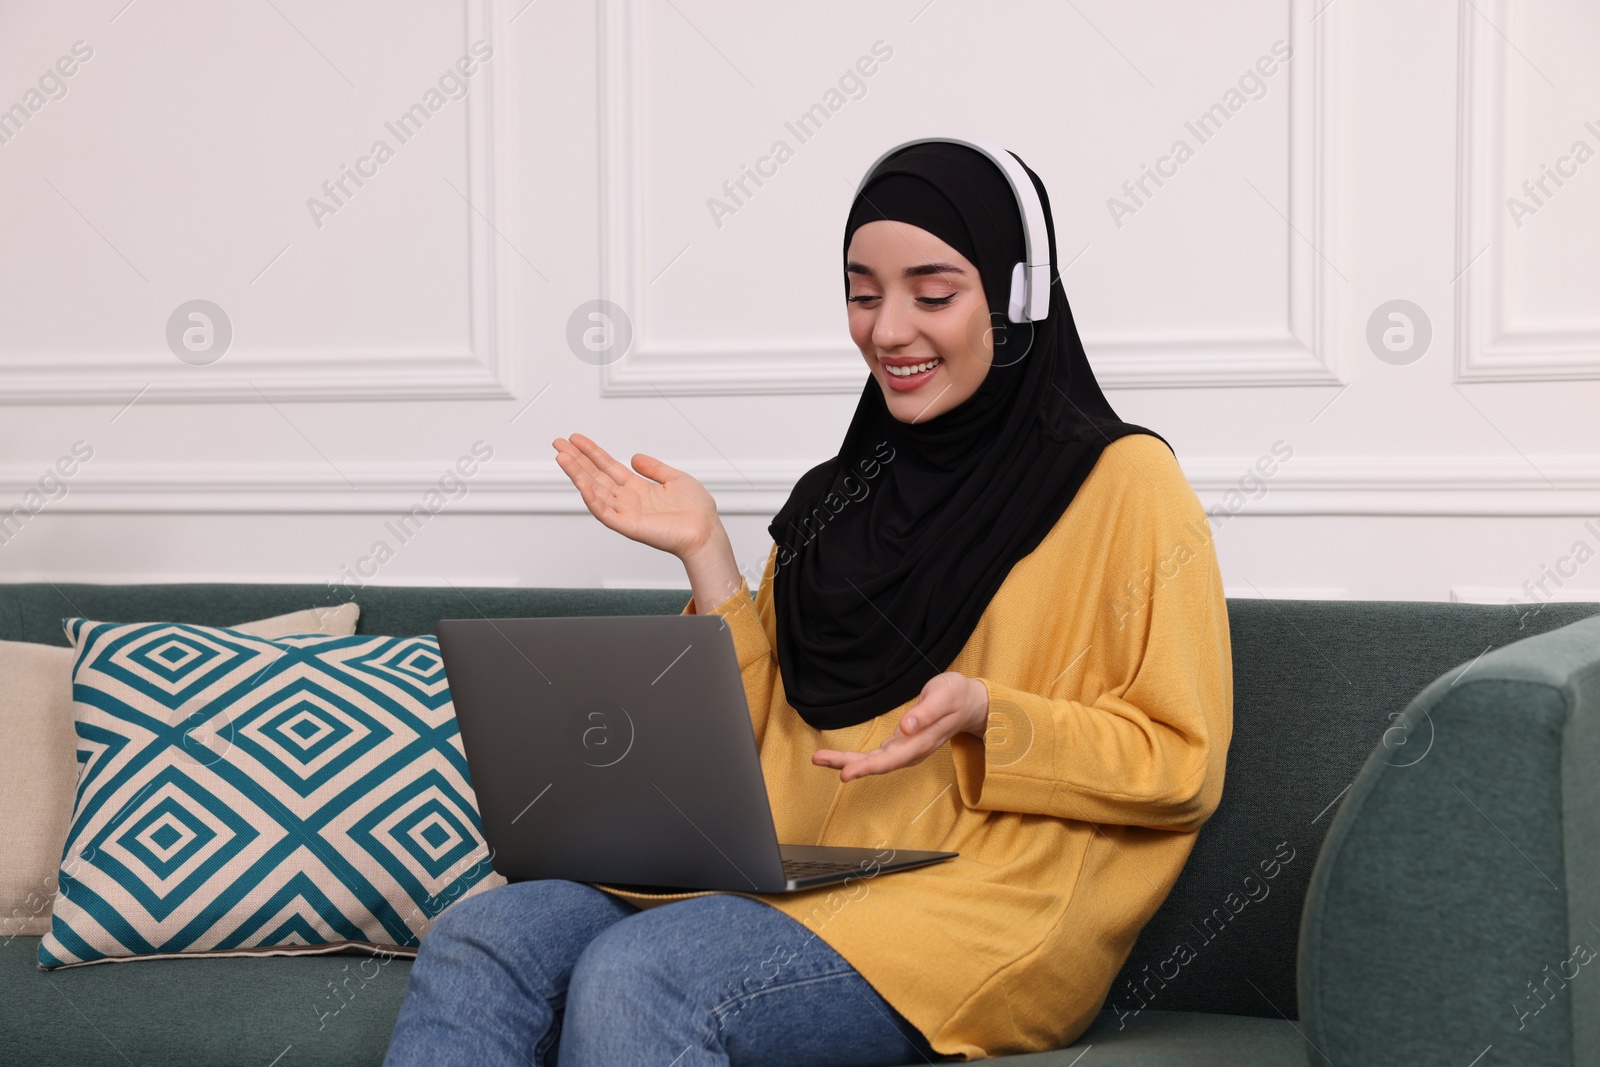 Photo of Muslim woman in hijab and headphones using video chat on laptop indoors